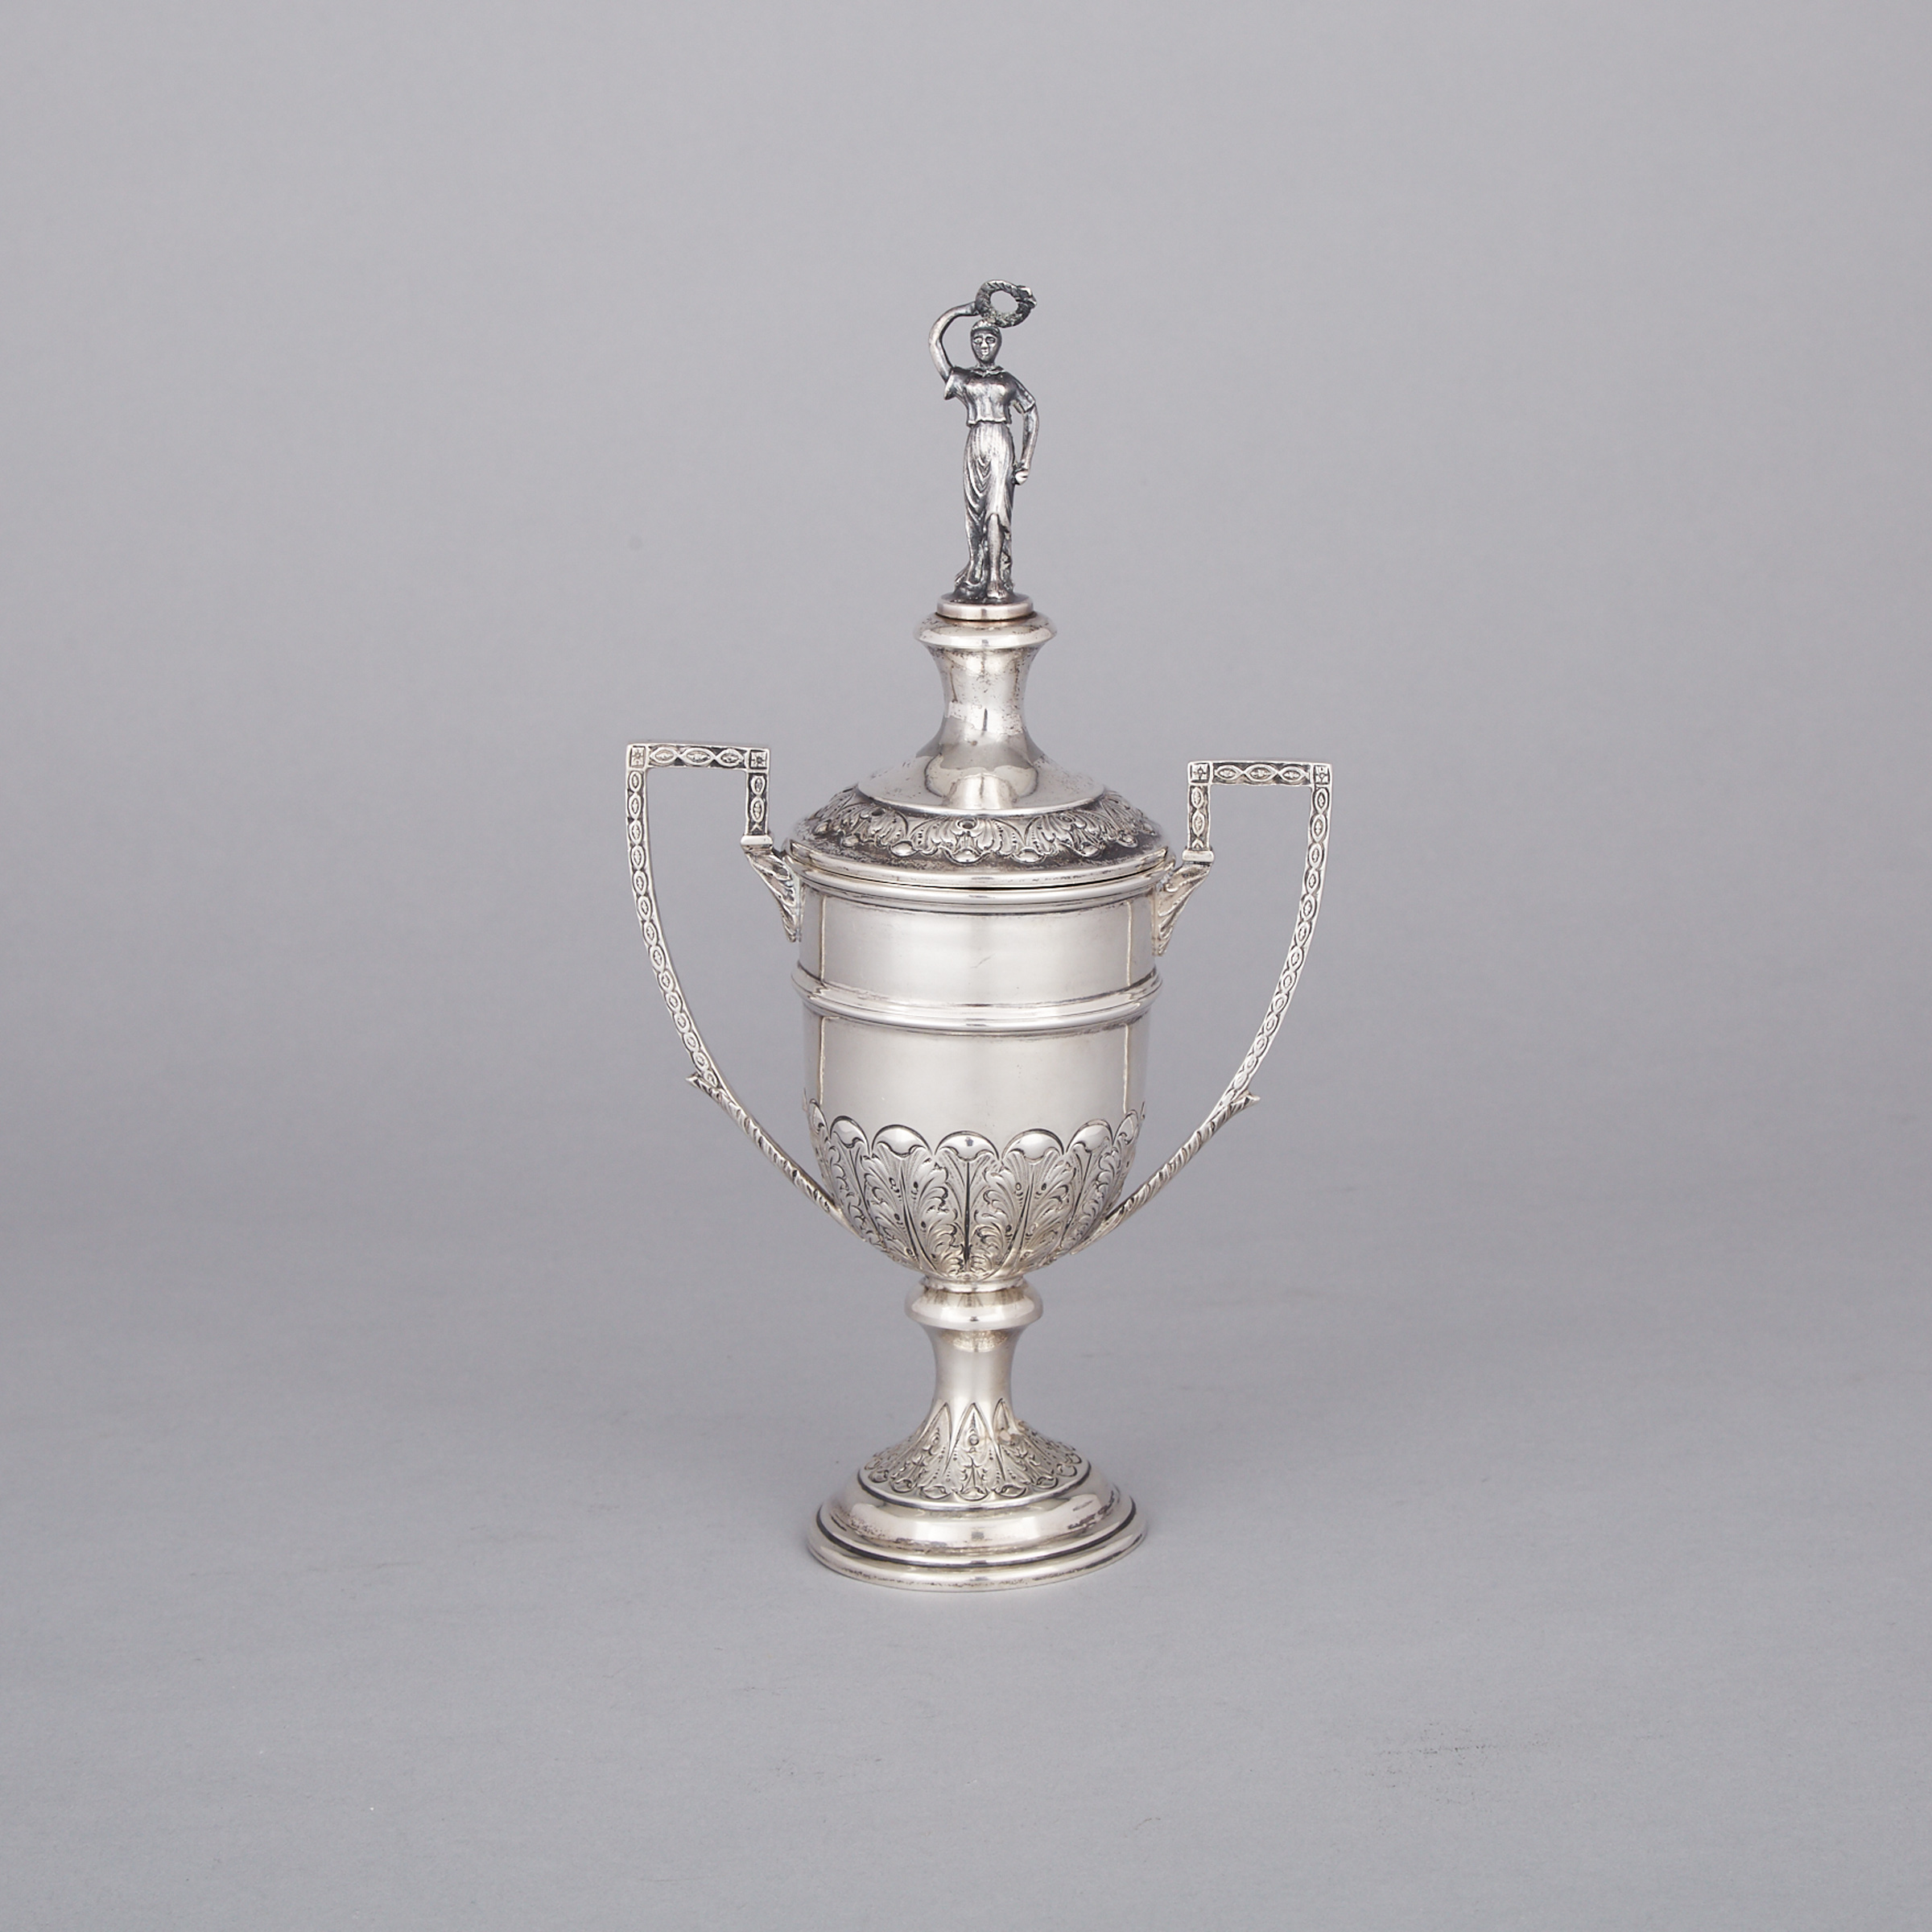 English Silver Covered Trophy Cup, James Deakin & Sons, Sheffield, 1911